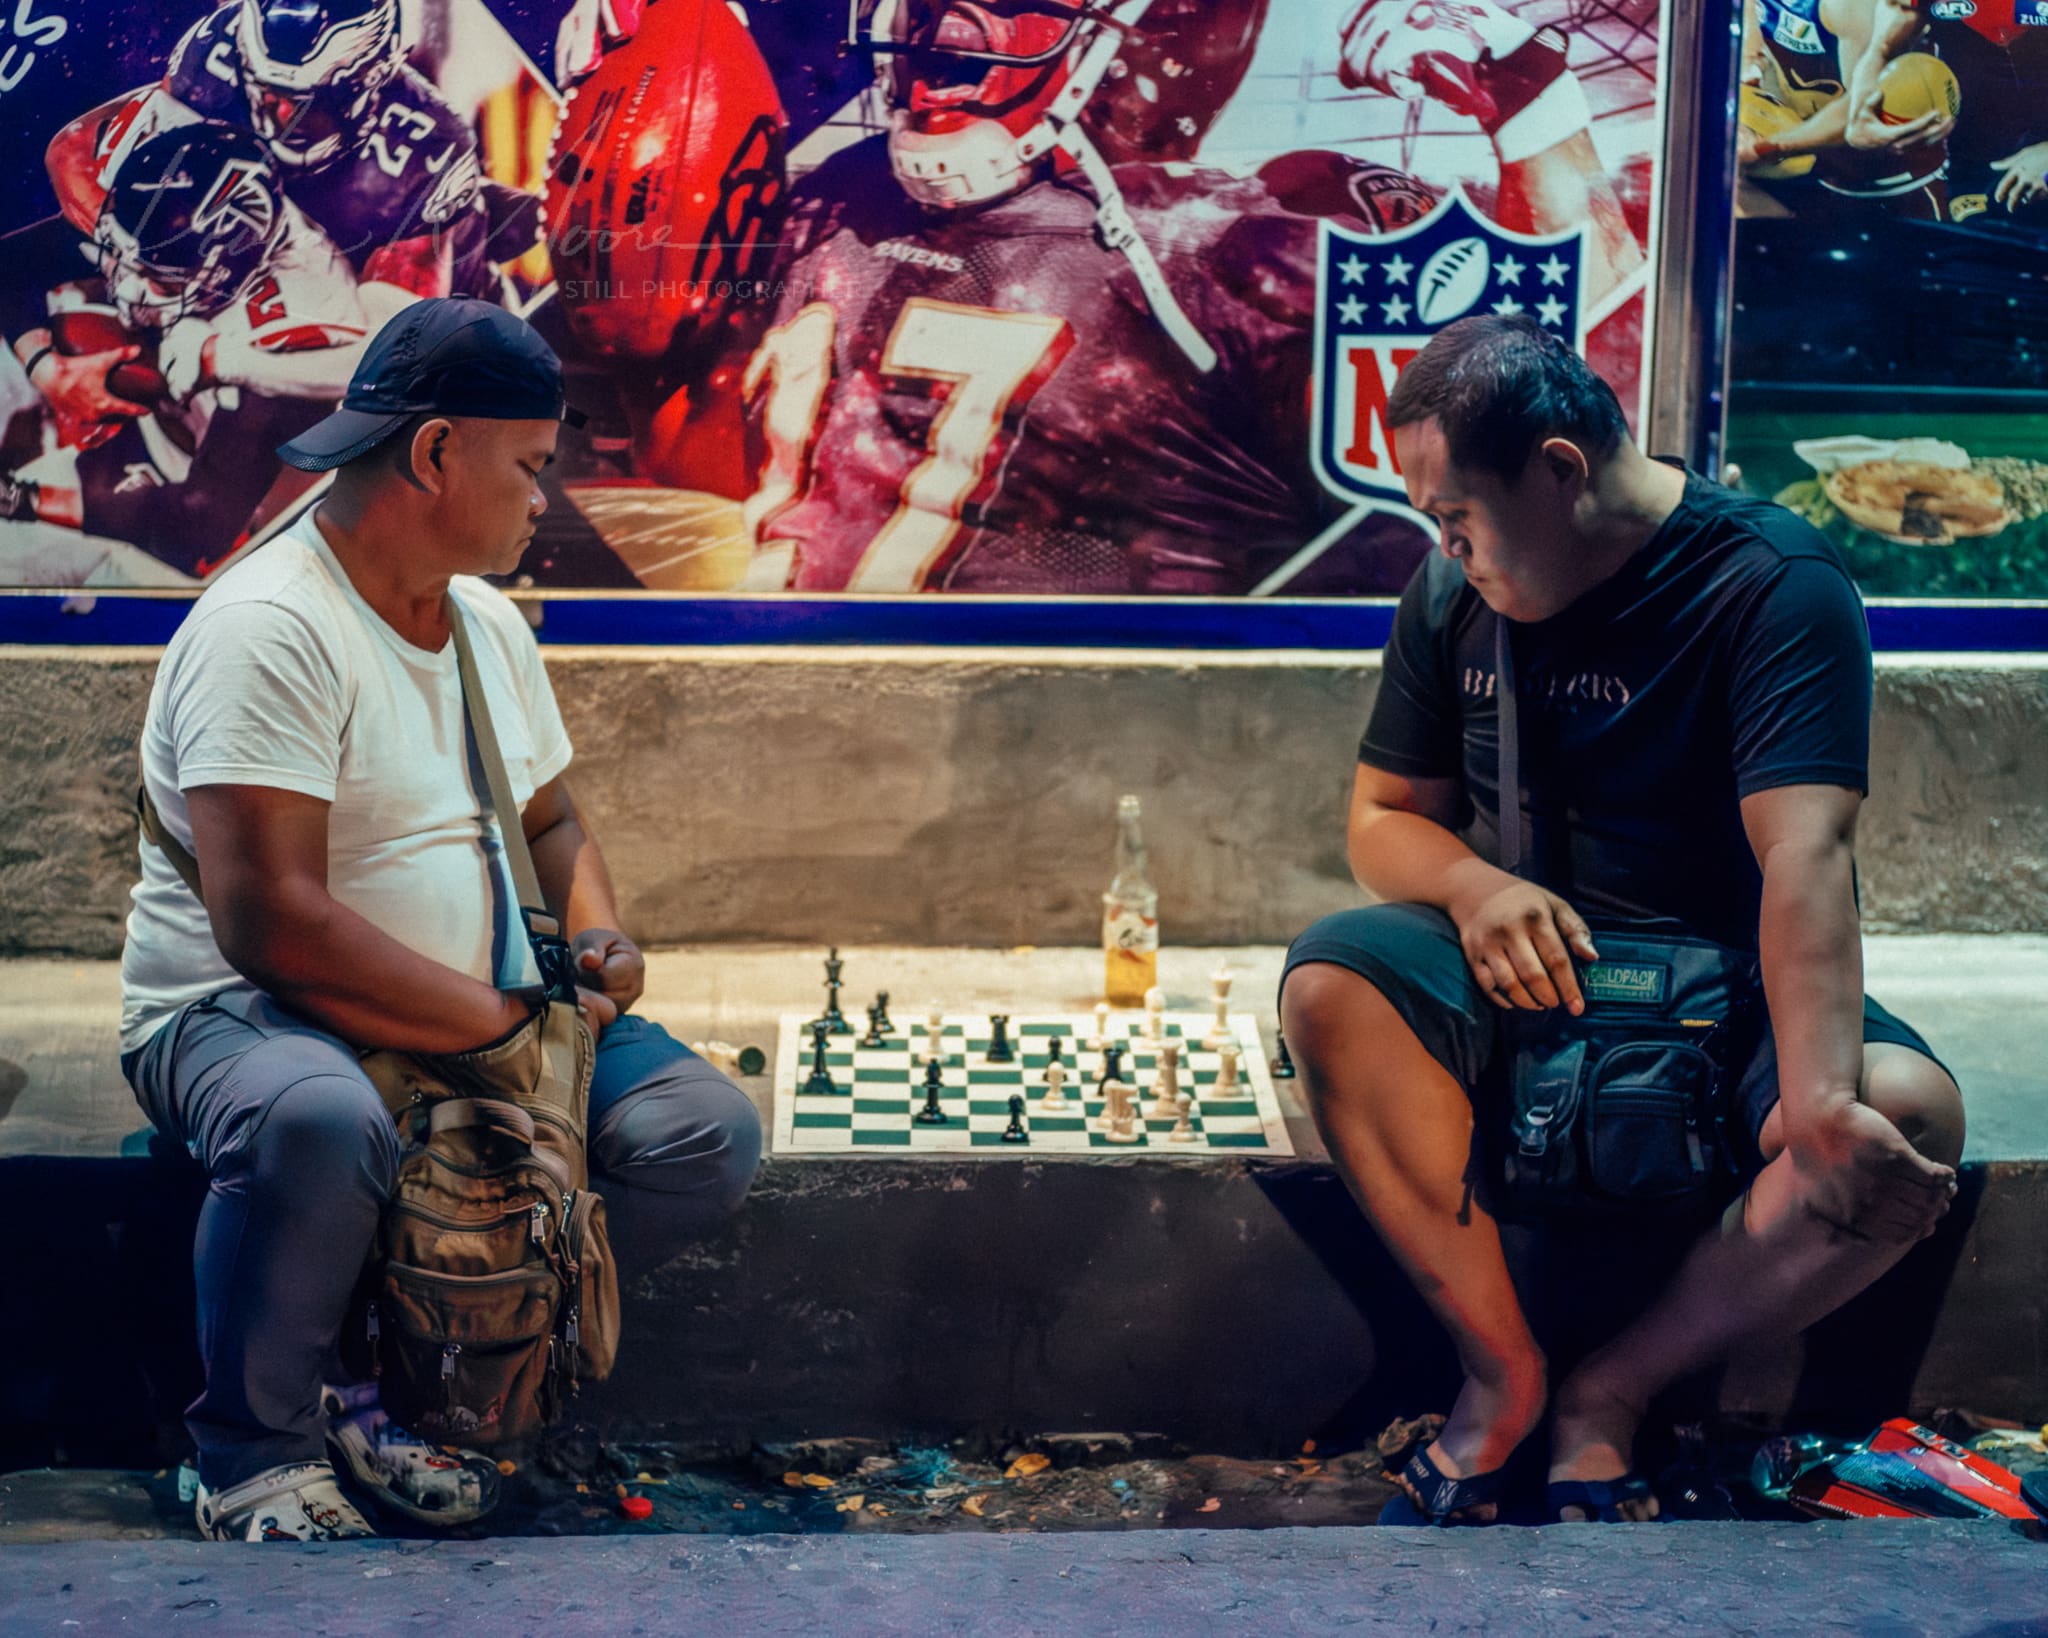 Two men engrossed in an outdoor street chess game at night with a vibrant NFL mural backdrop.